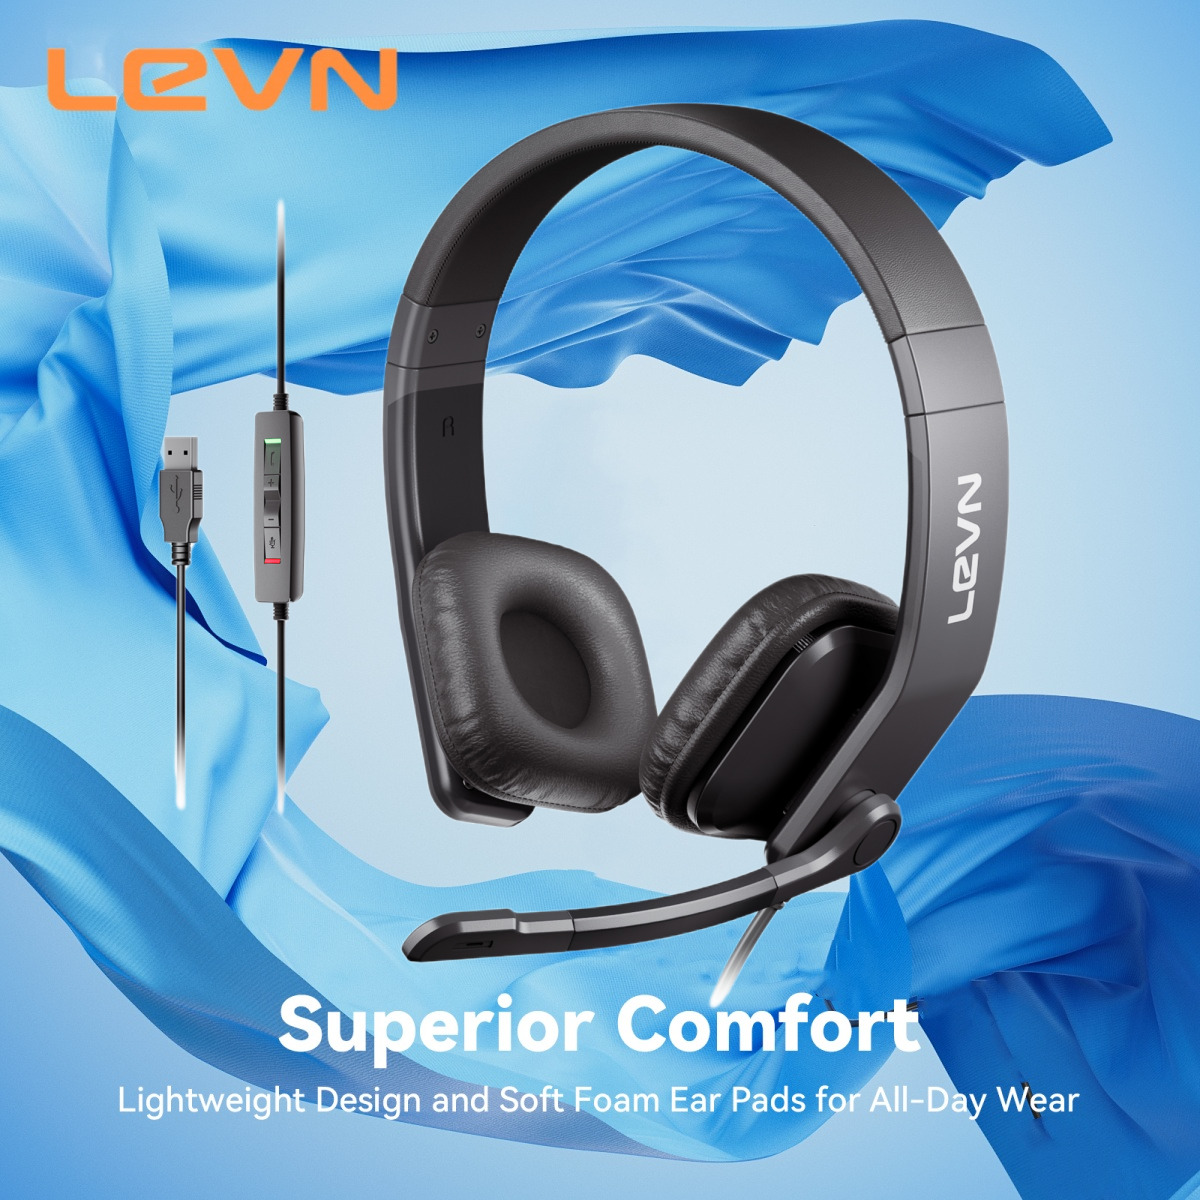 LEVN USB Headset For PC, Computer Wired Headset With Microphone Noise Cancelling